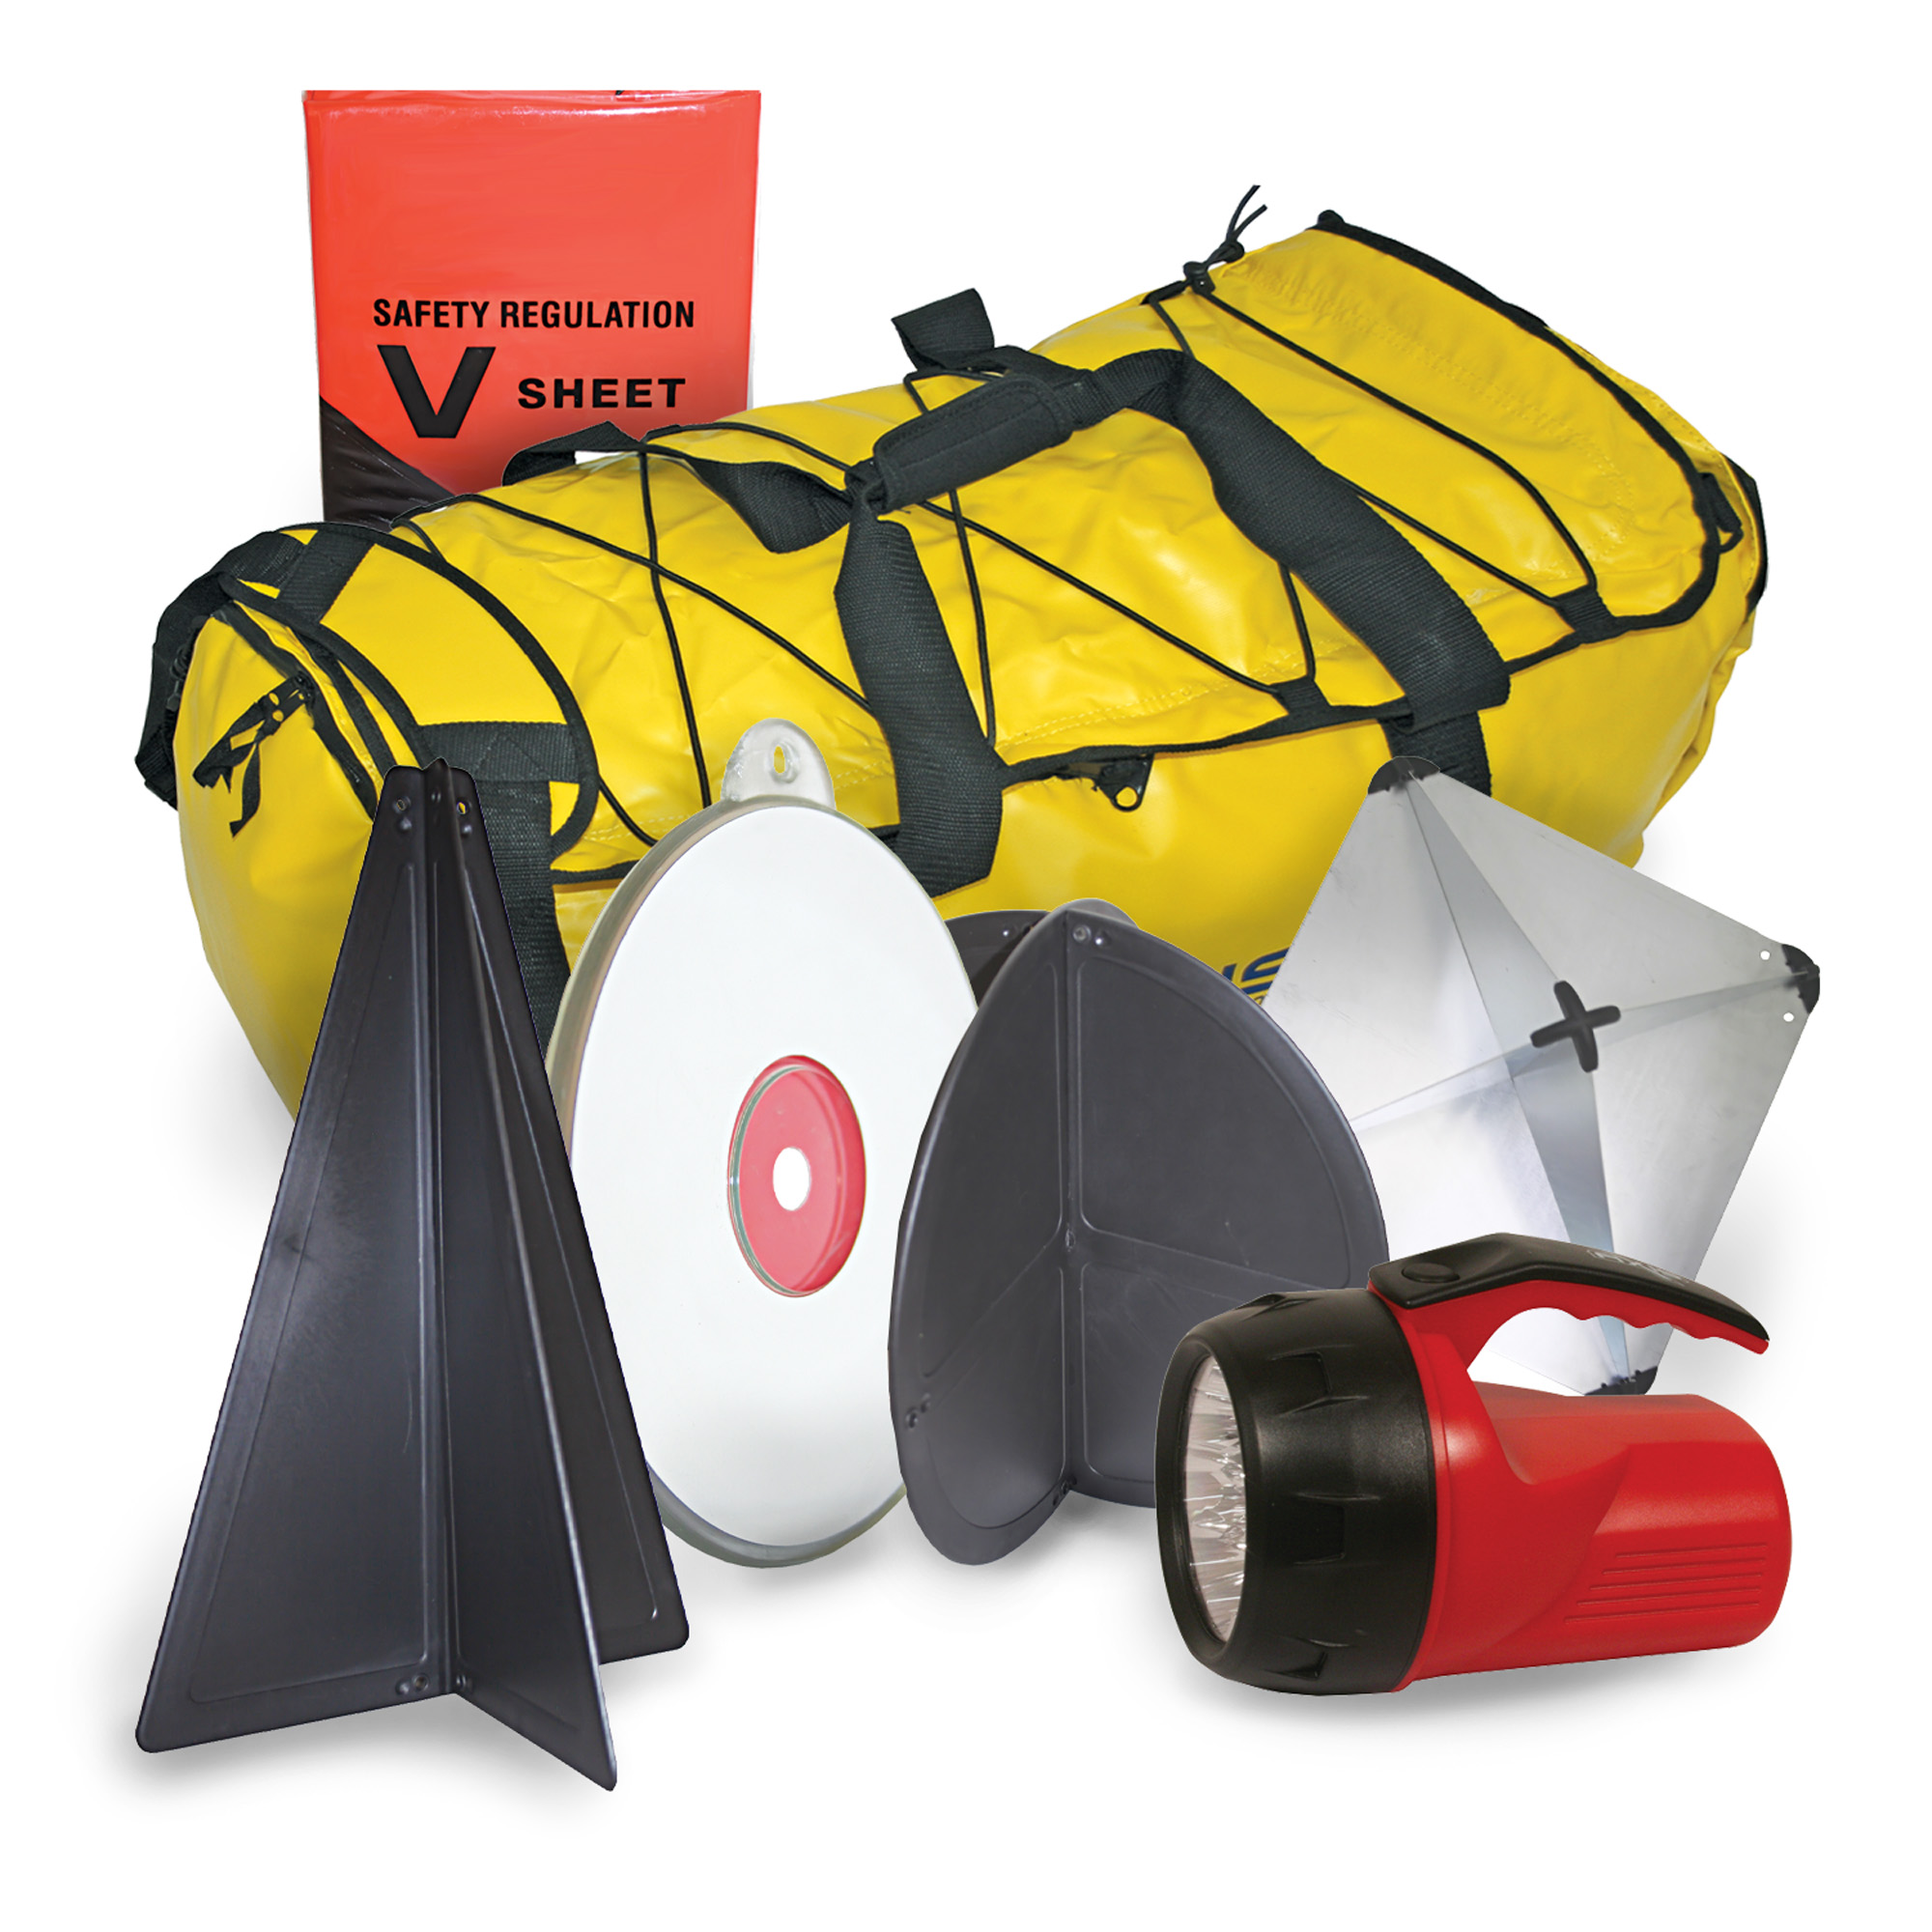 Product category - Safety Bag / Safety Signals / Safety Kits